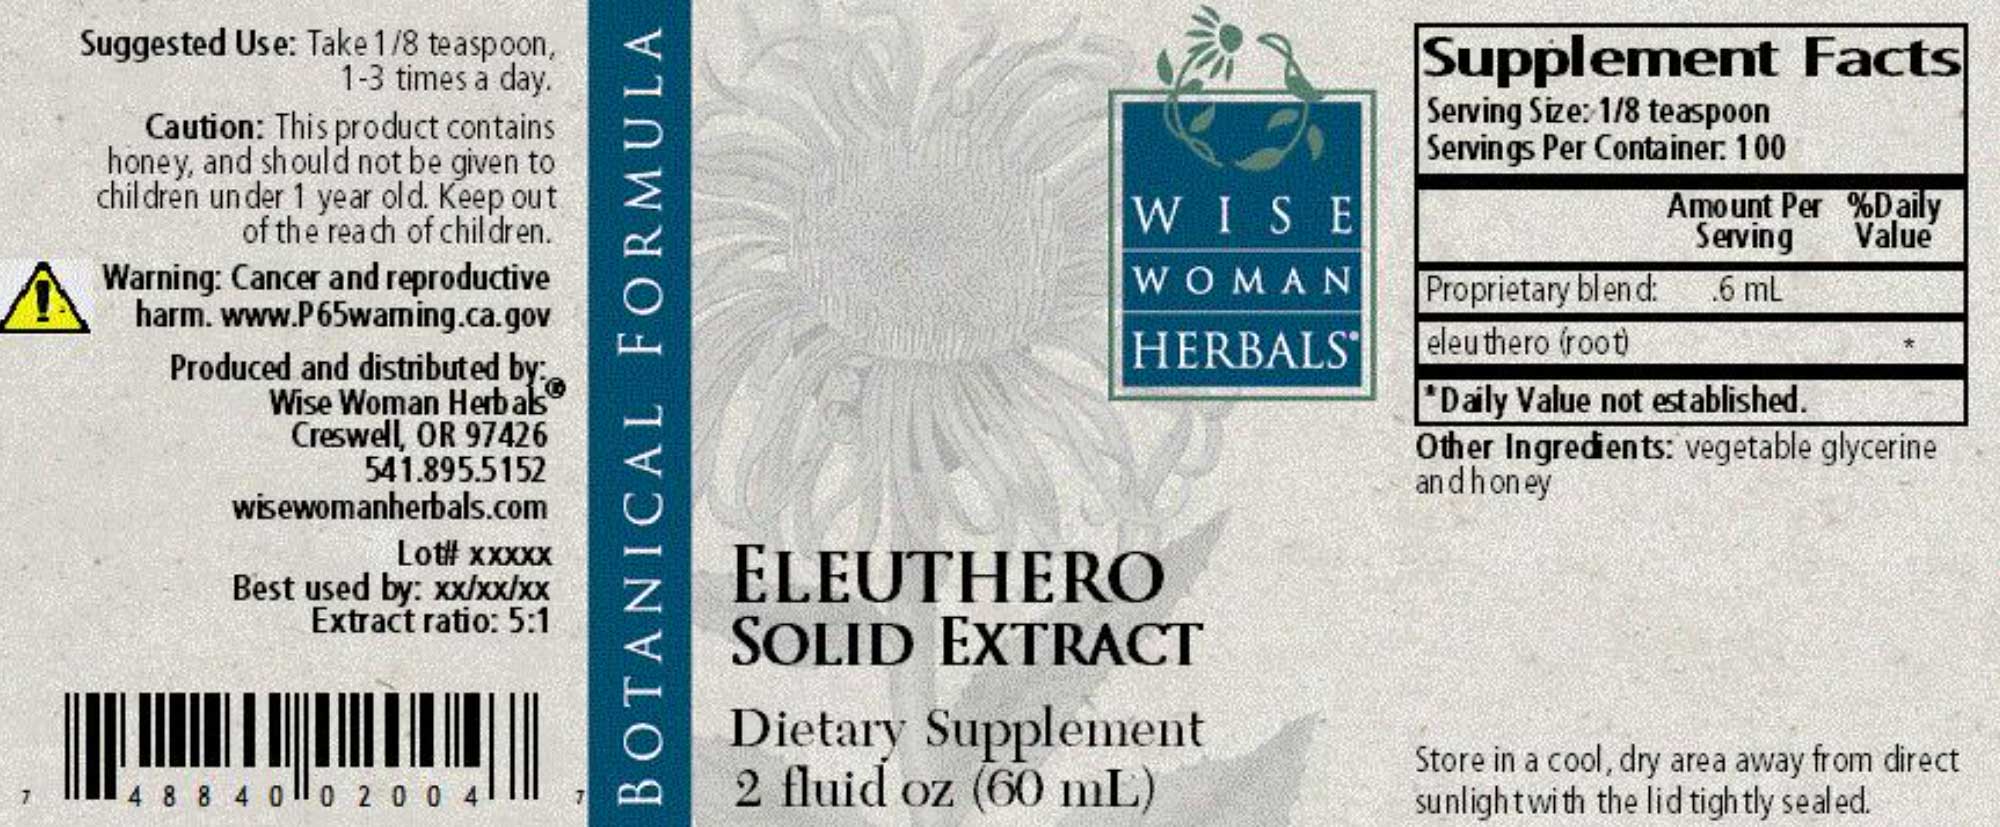 Wise Woman Herbals Eleuthero Solid Extract Label